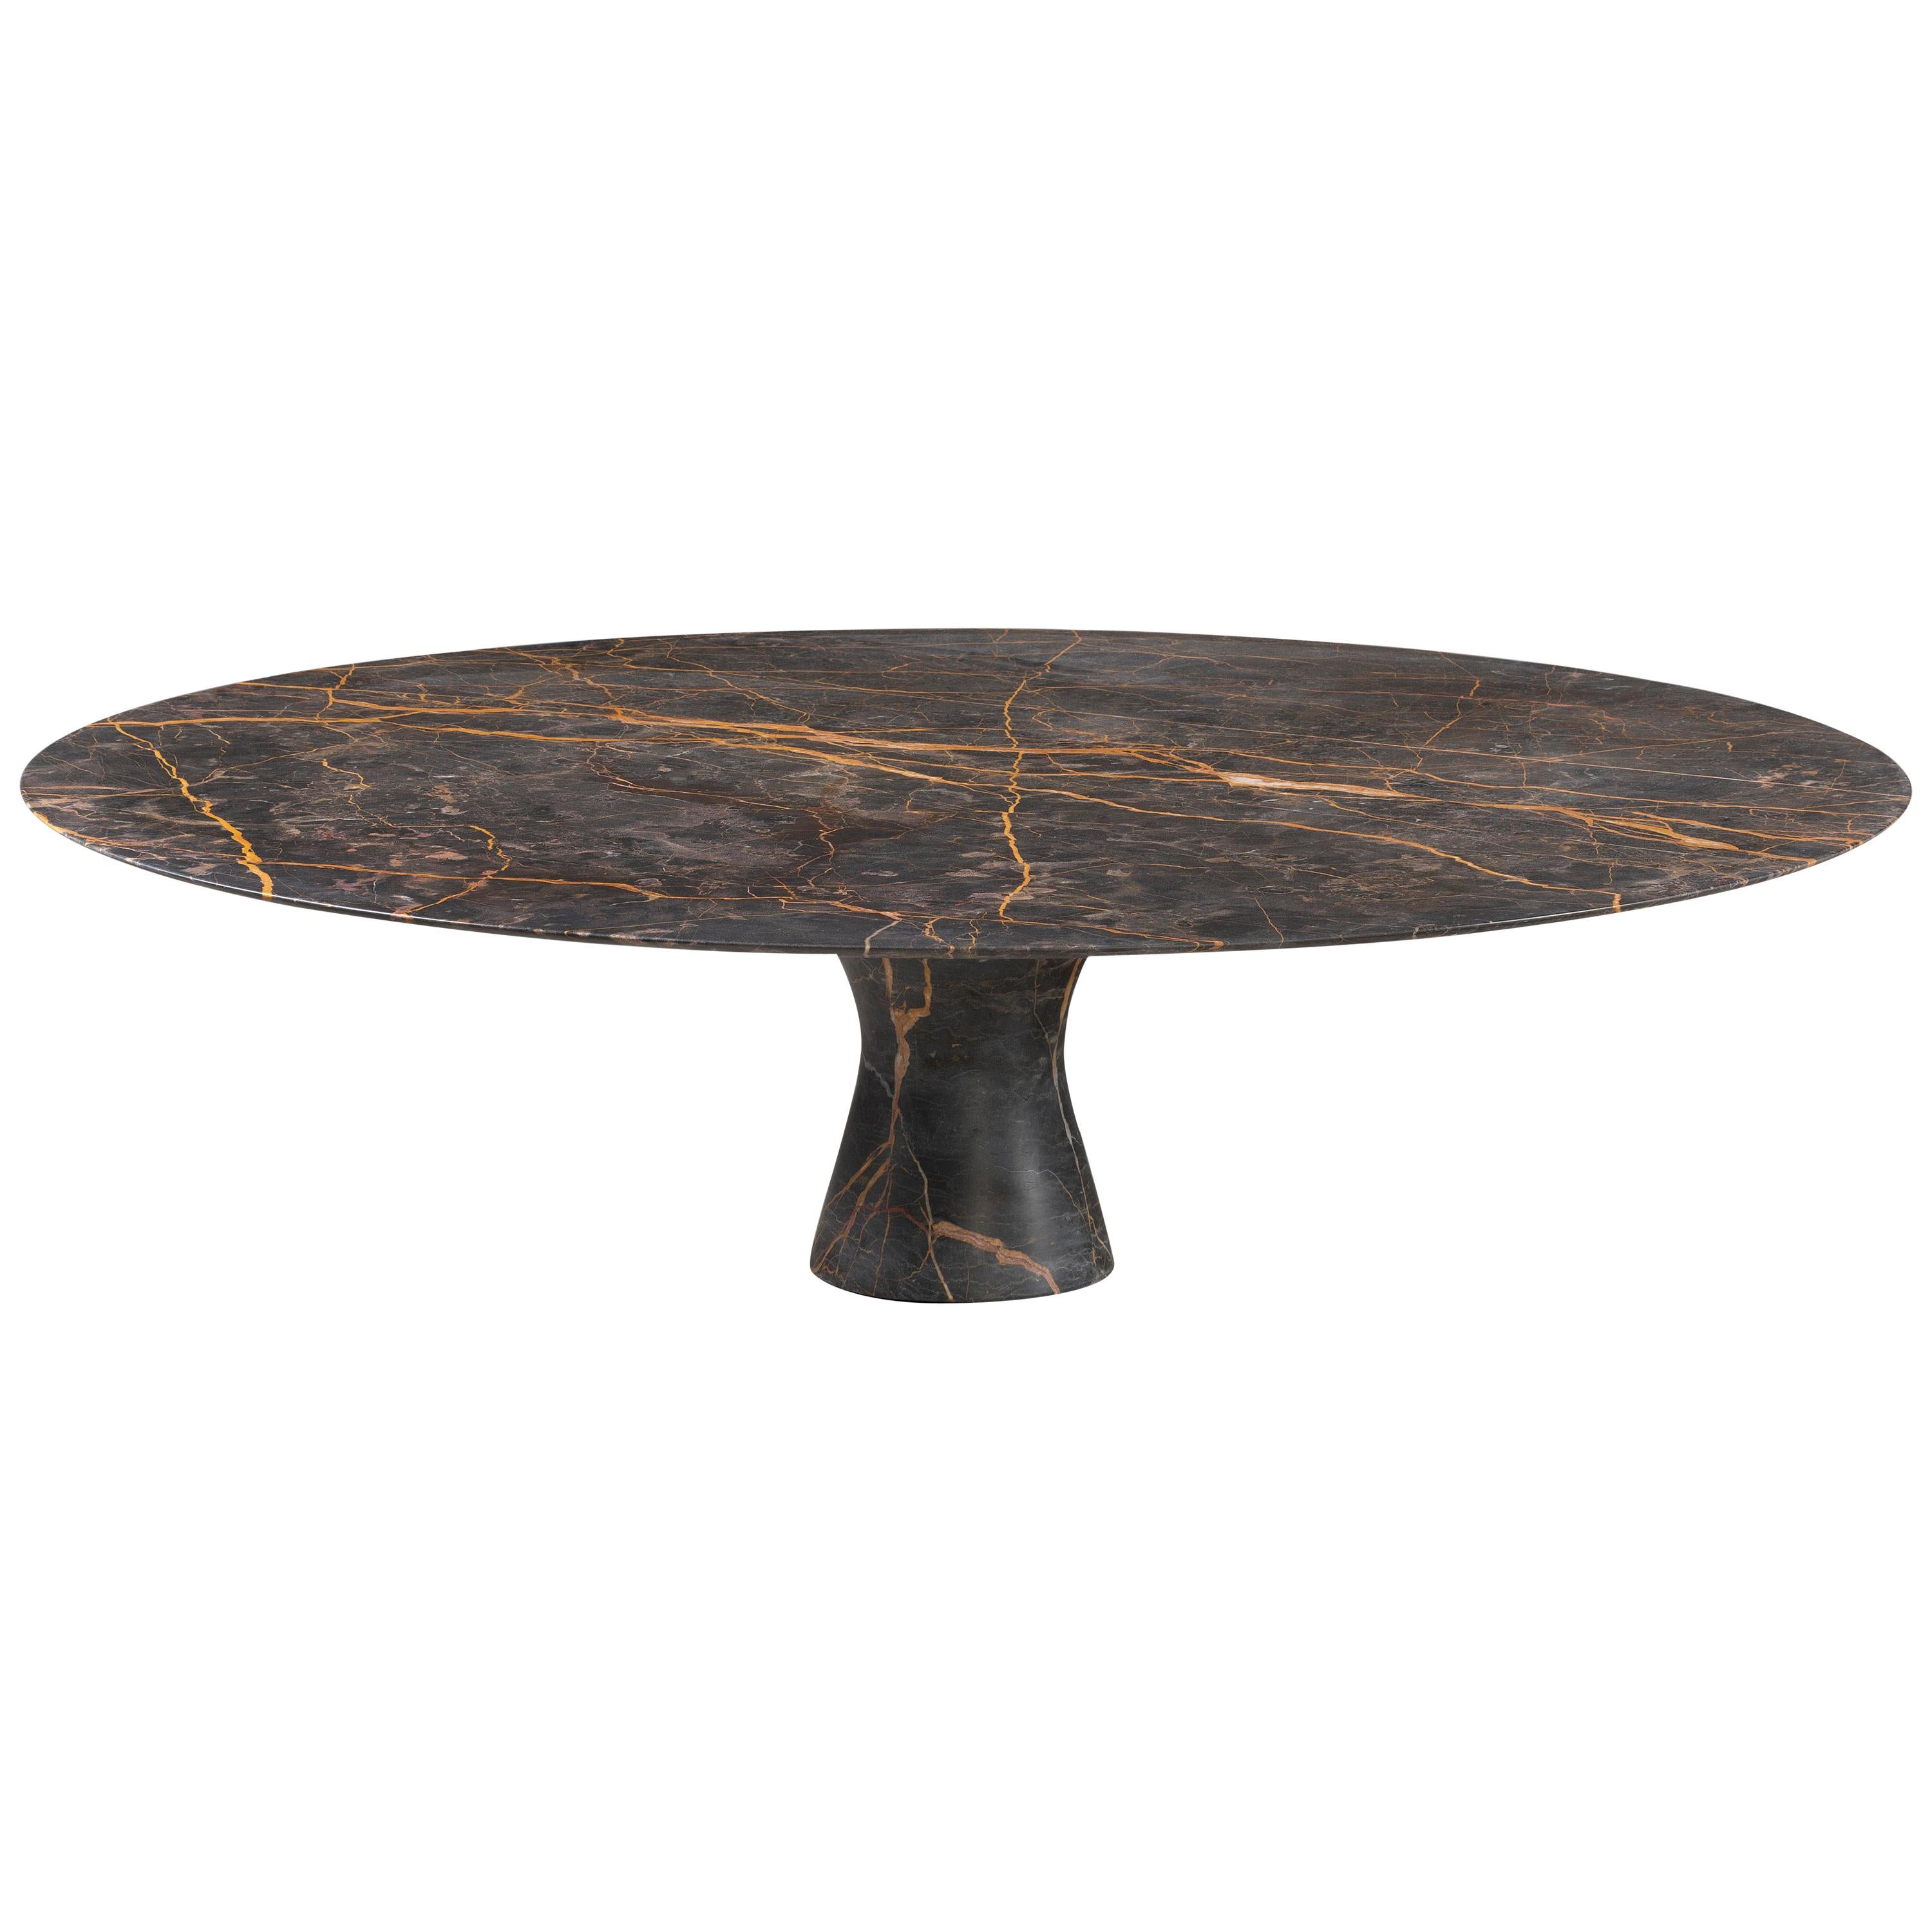 Port Saint Laurent Refined Contemporary Marble low table 160/36
Dimensions: diameter 160 x height 36 cm
Materials: Port Saint Laurent

Angelo is the essence of a round table in natural stone, a sculptural shape in robust material with elegant